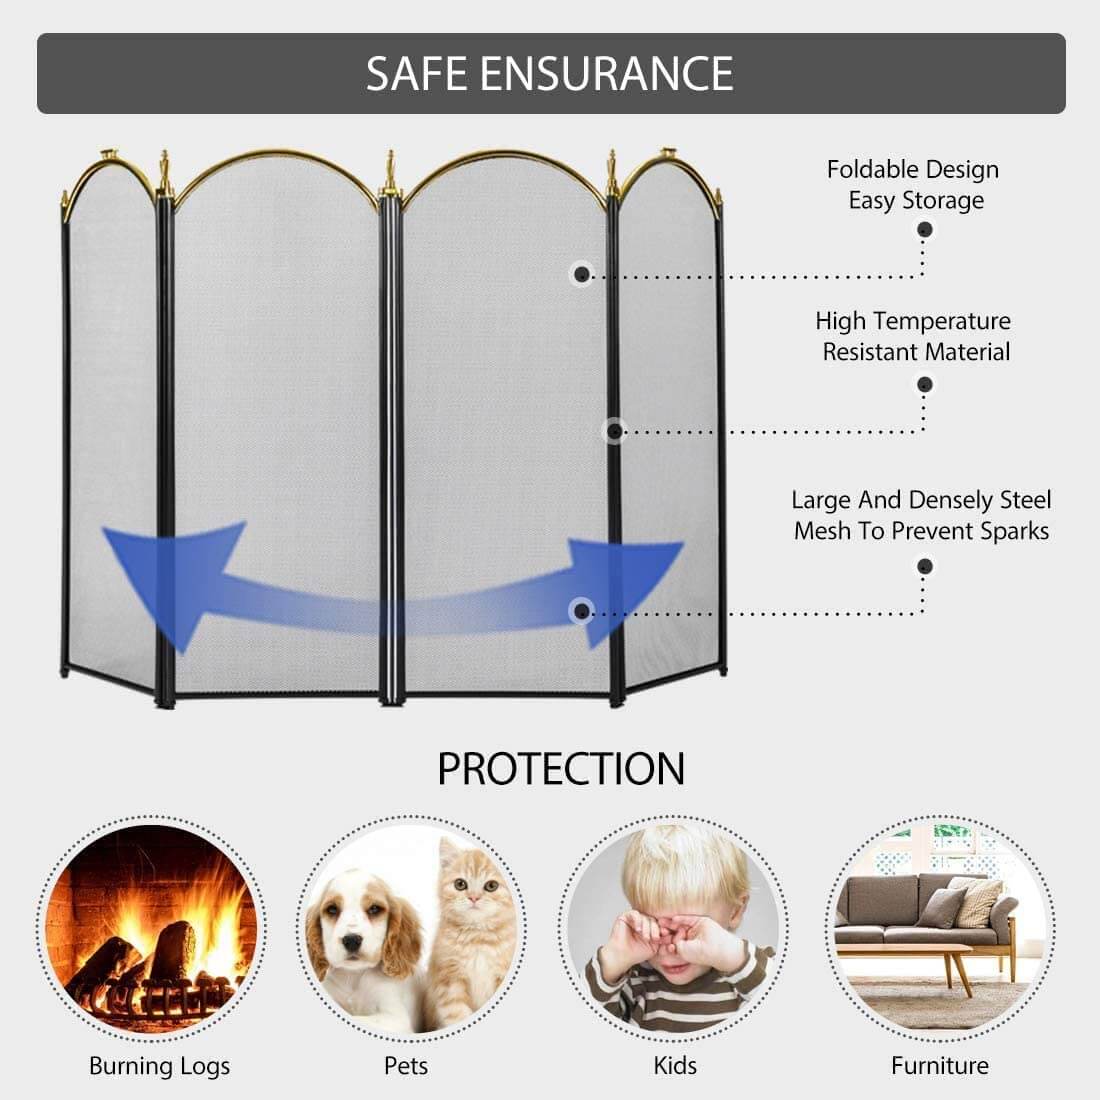 3-Panel Fireplace Screen Decor Cover Pets Baby Child Safety Folded